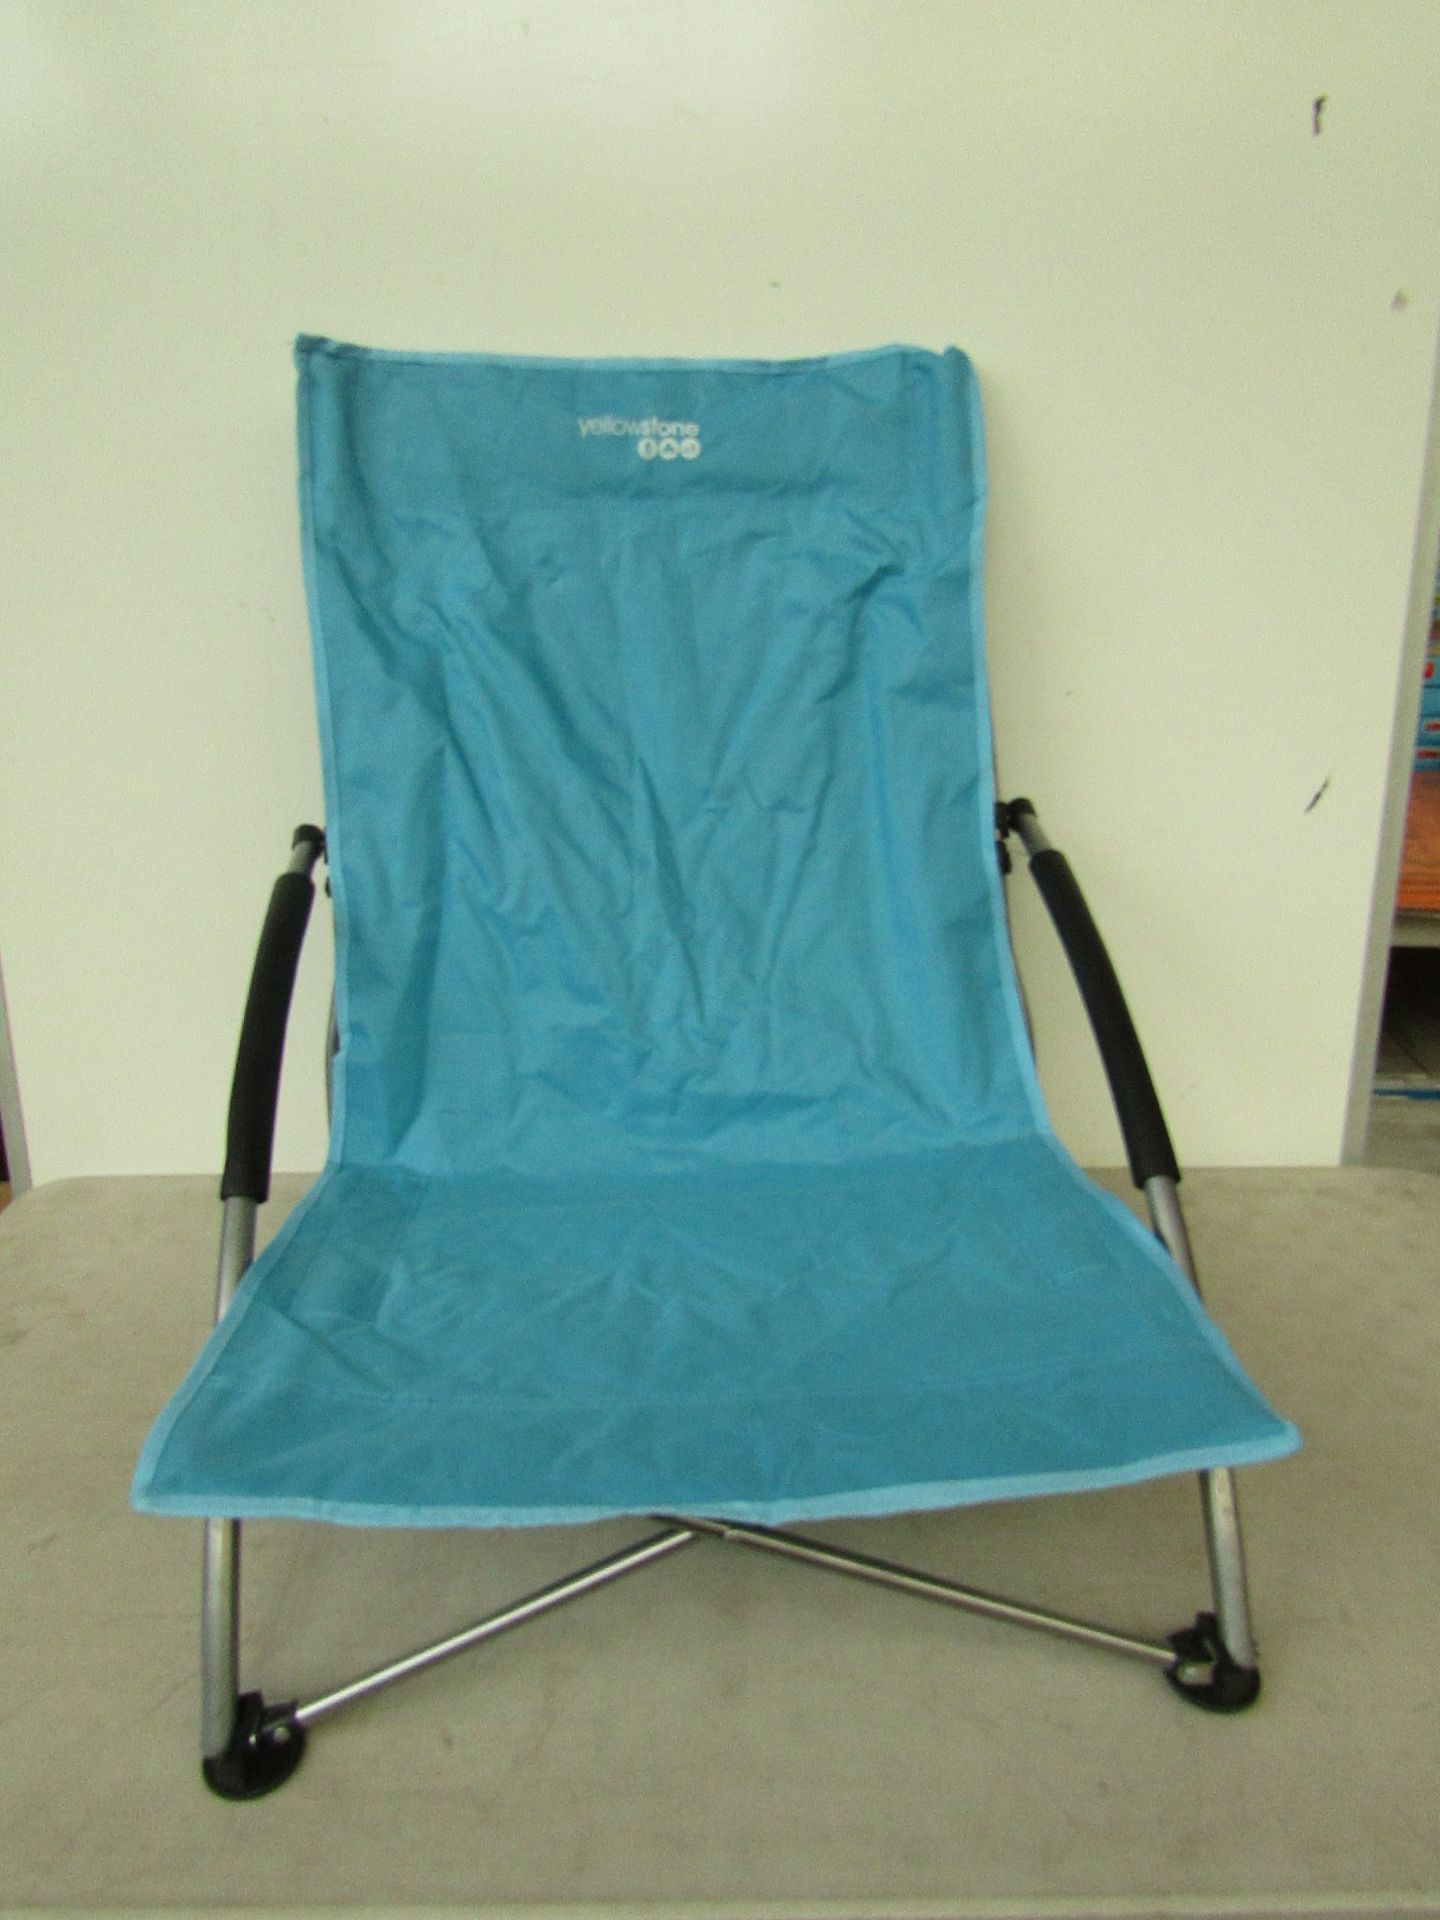 Yellow stone Low Profile chair with carry bag.